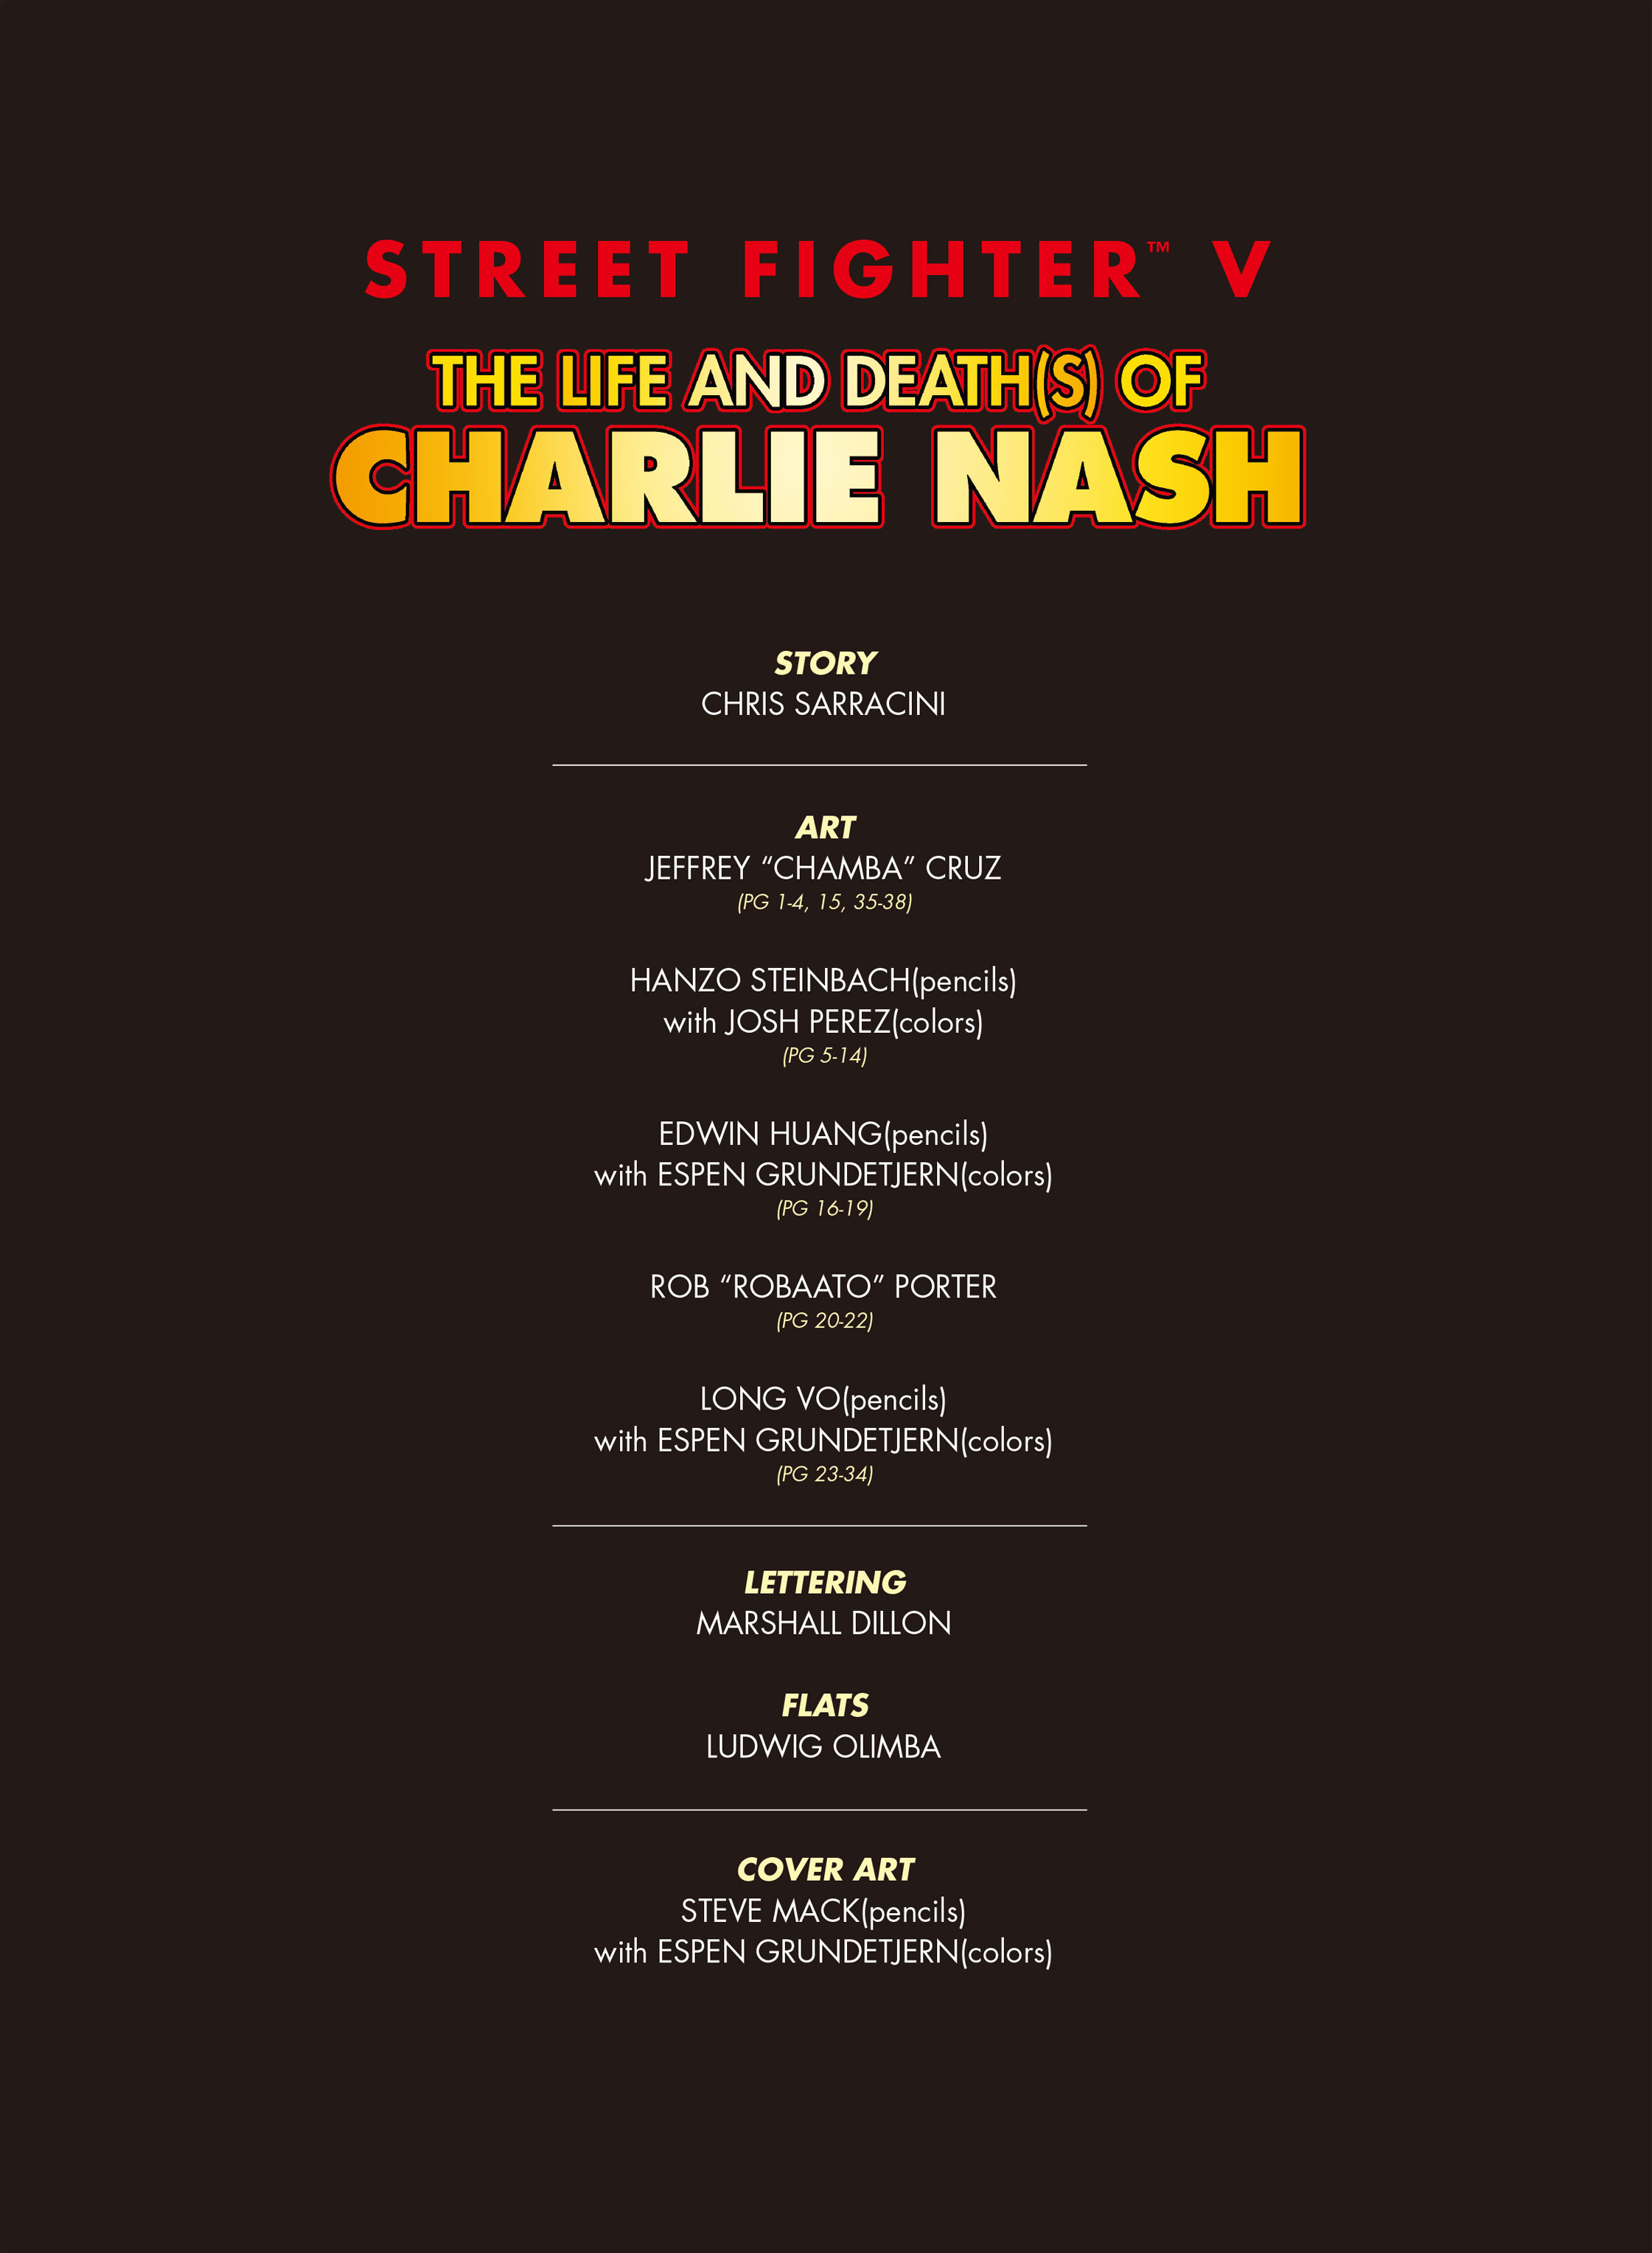 Read online Street Fighter V: The Life and Death(s) of Charlie Nash comic -  Issue # TPB - 3